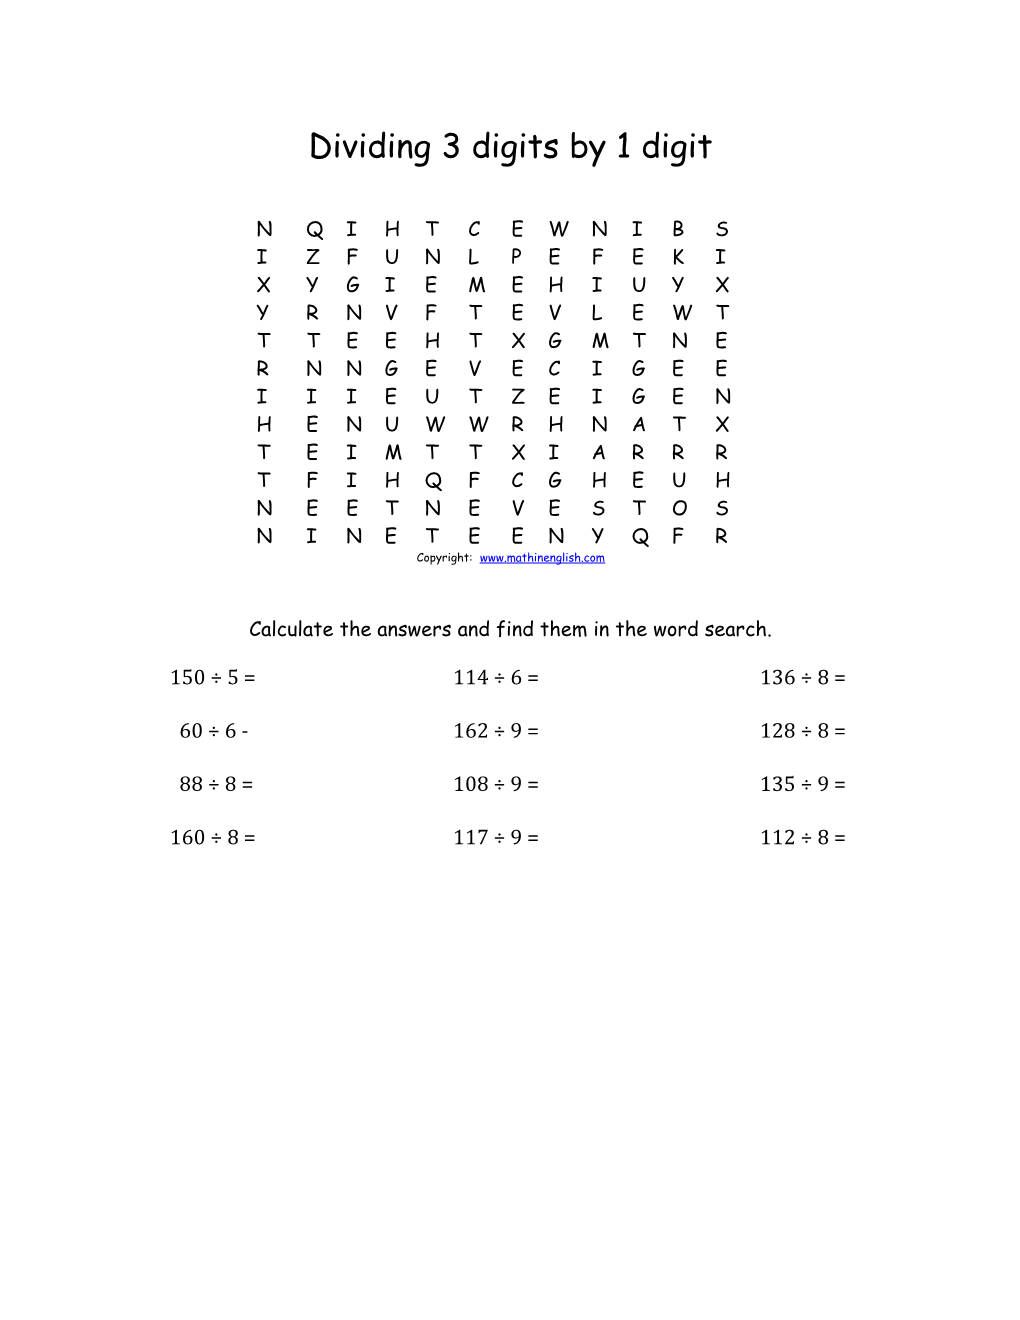 Calculate the Answers and Find Them in the Word Search